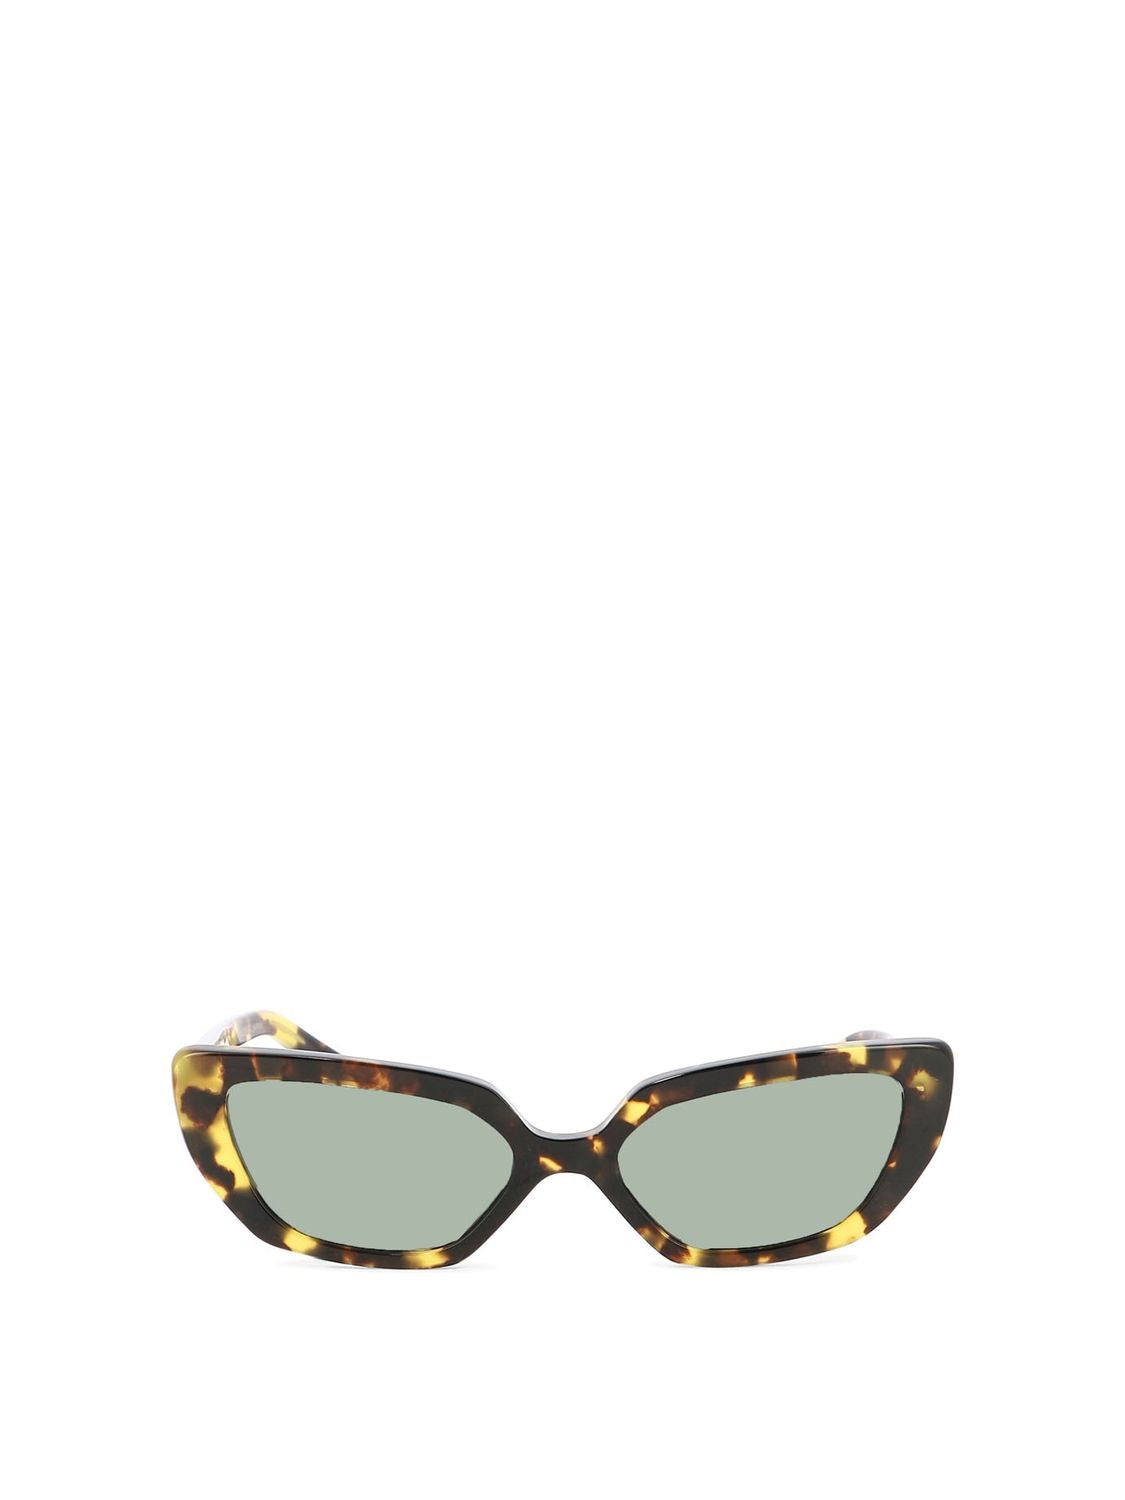 Bold and Sleek: Undercover Cat Eye Sunglasses in Brown for Men